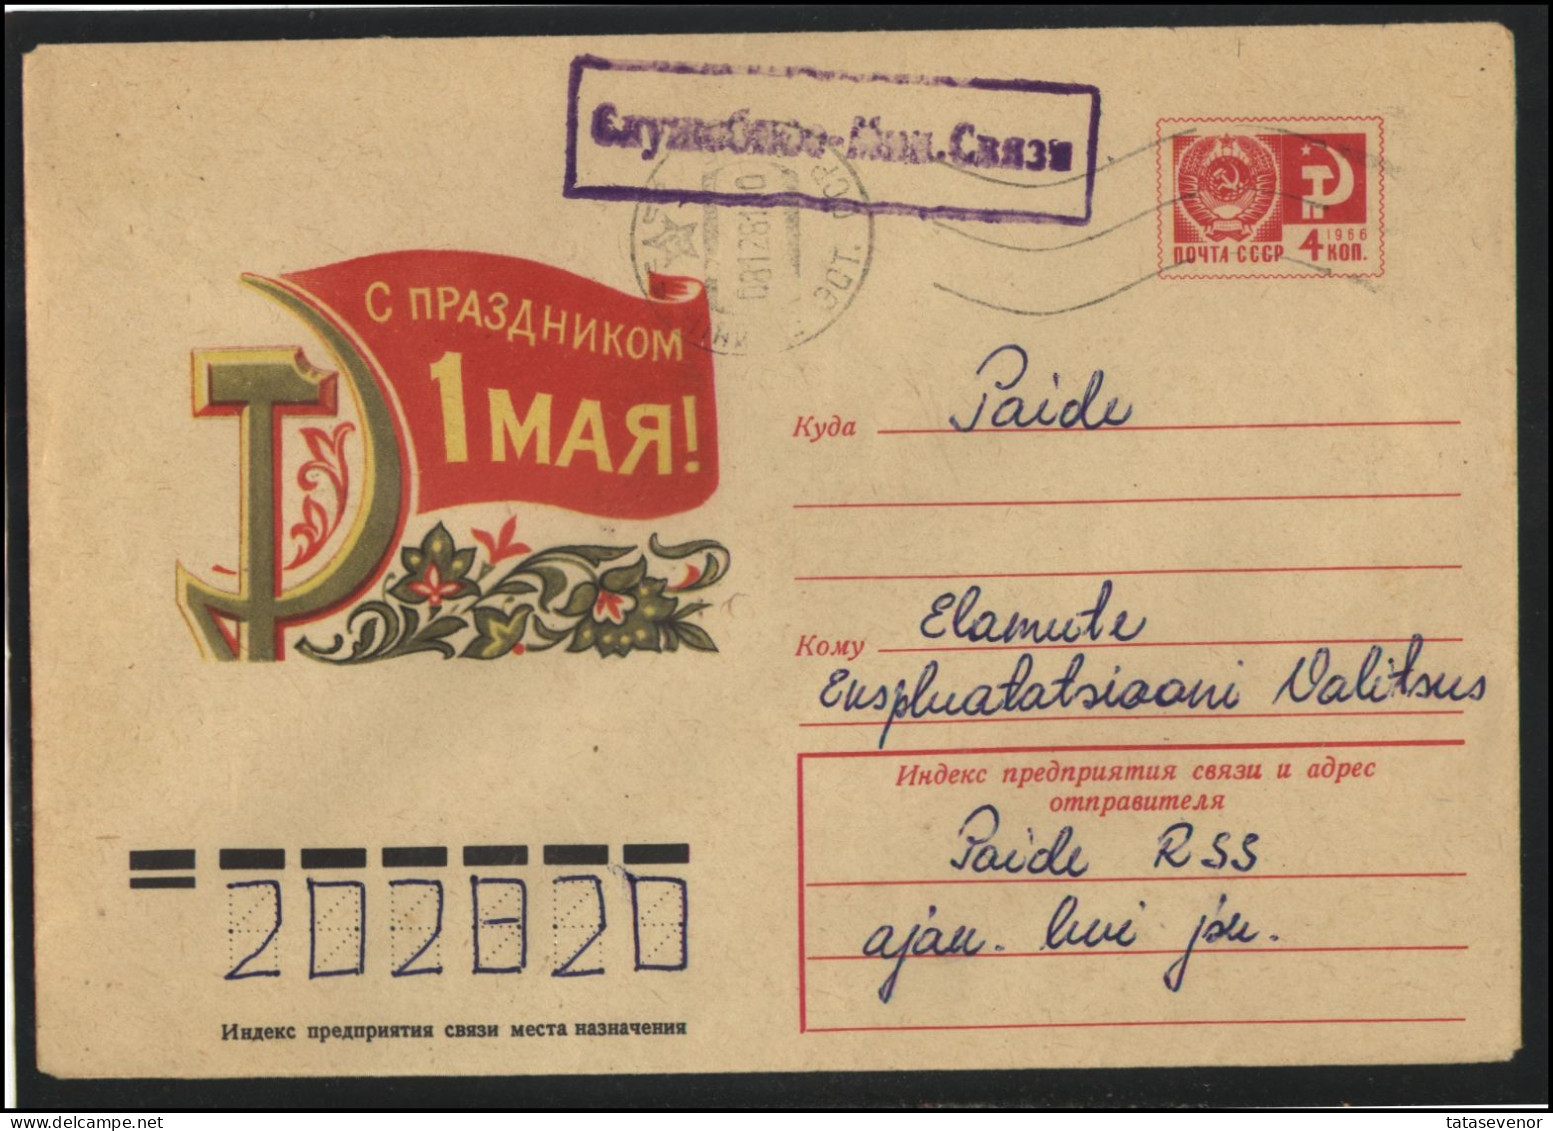 RUSSIA USSR Stationery ESTONIA USED AMBL 1380 PAIDE May Day Celebration - Zonder Classificatie